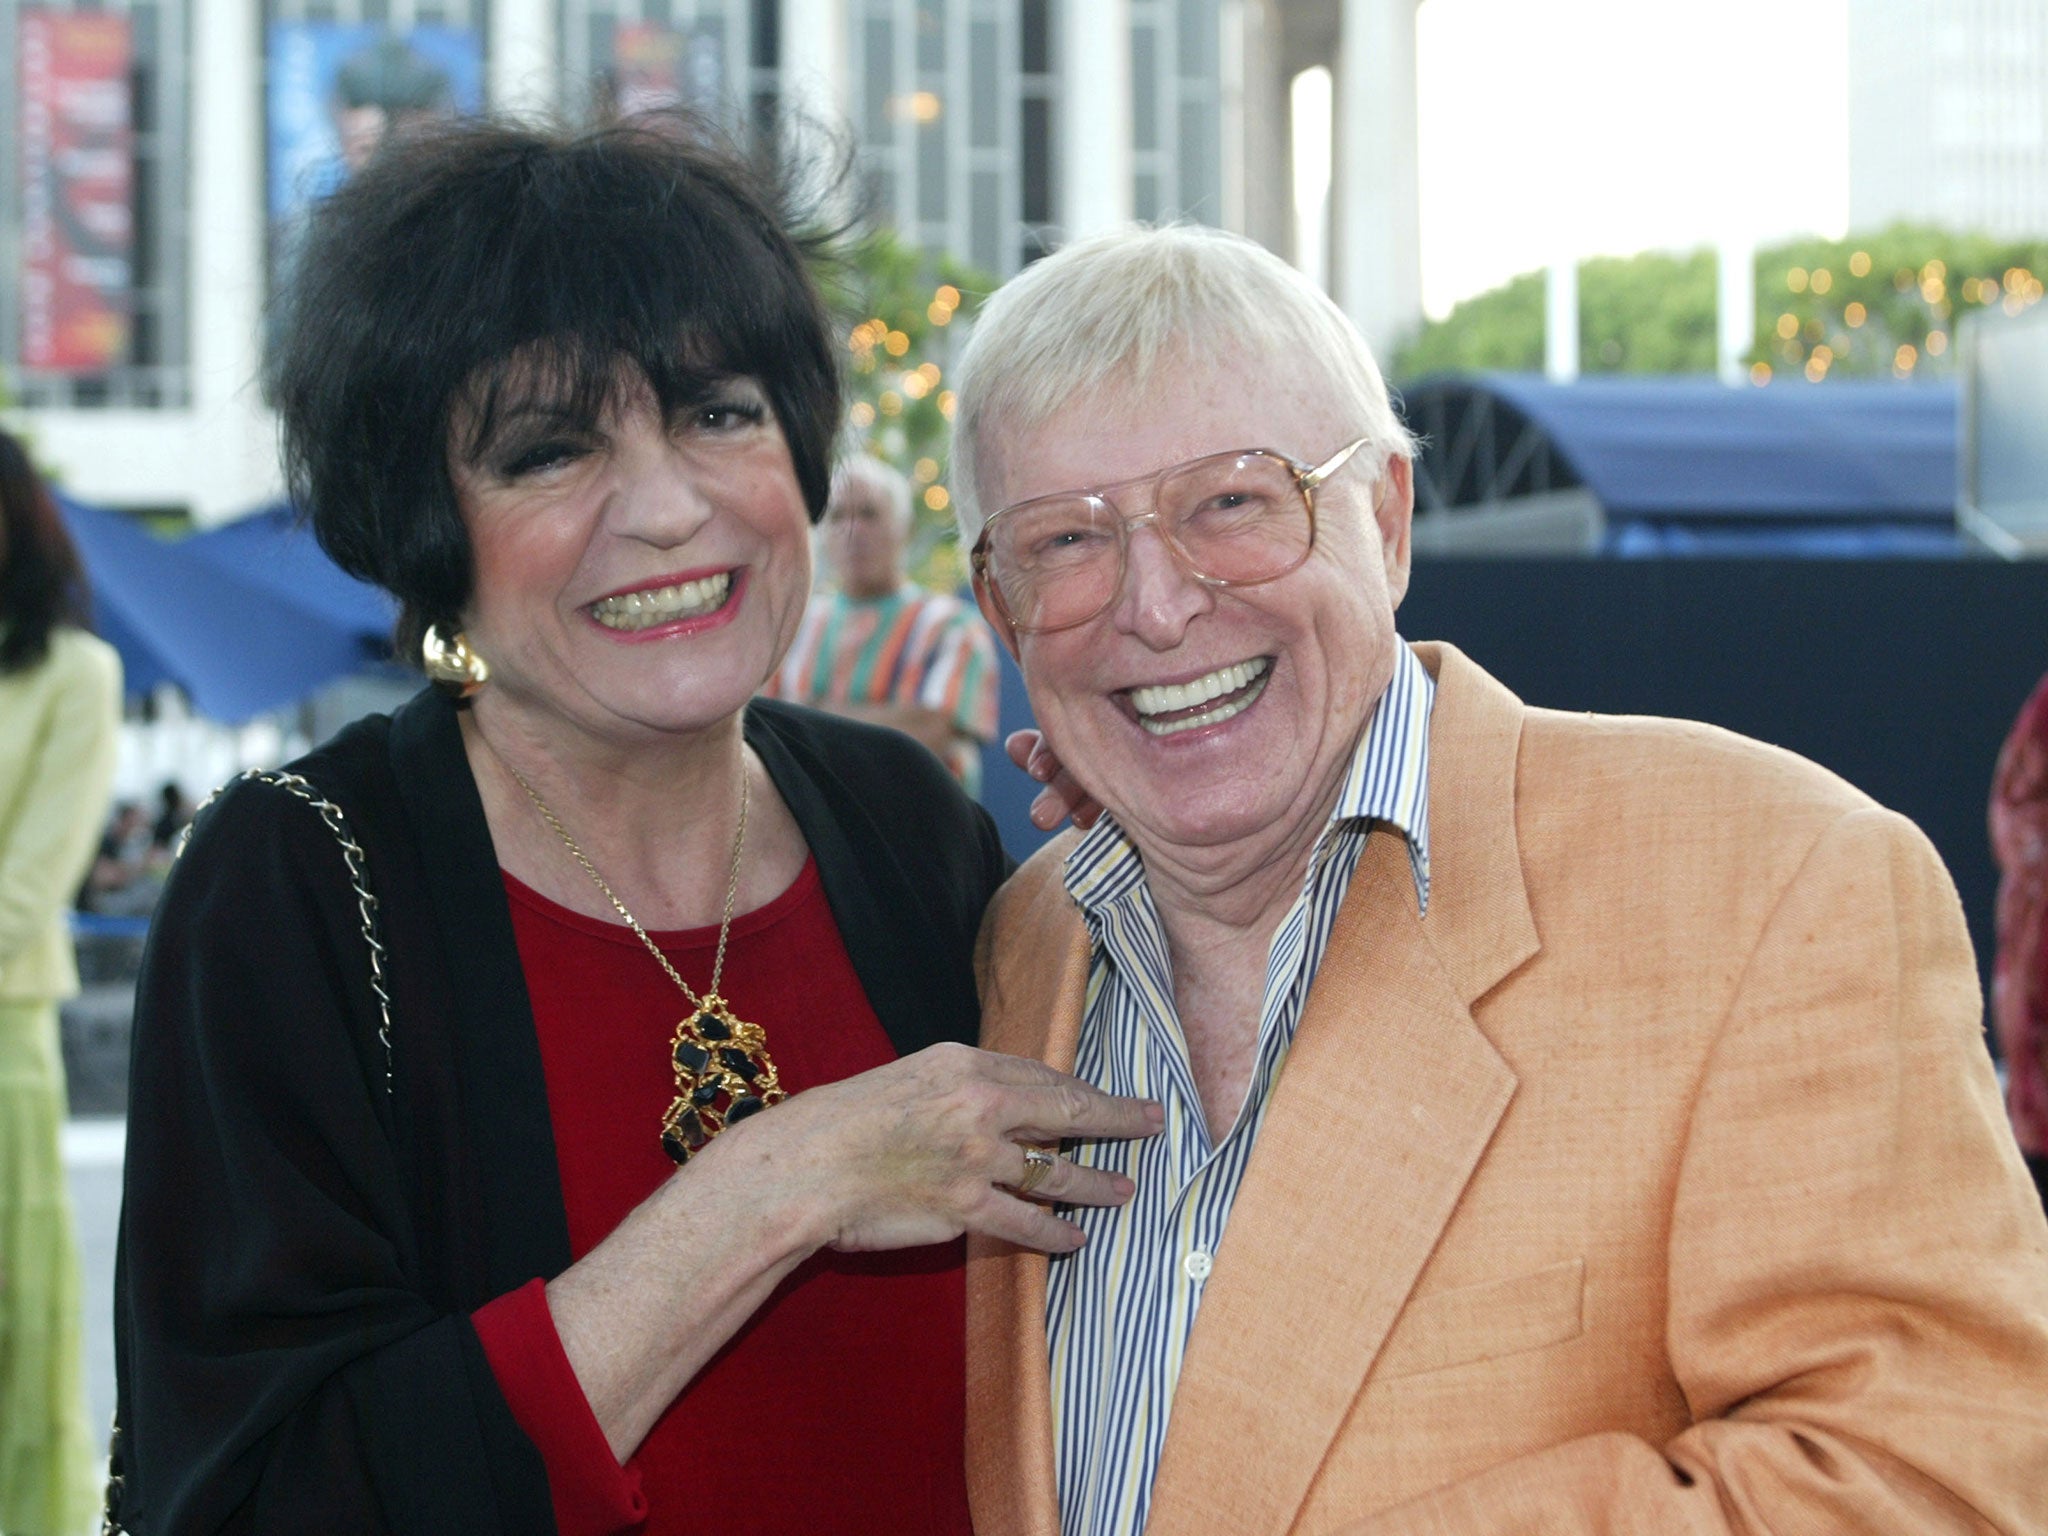 Kenny Kingston with Jo Anne Worley back in 2005. Kingston told by an interviewer that 500
years ago he would have been burned as a witch, he said, ‘I would be today, by a lot of people’